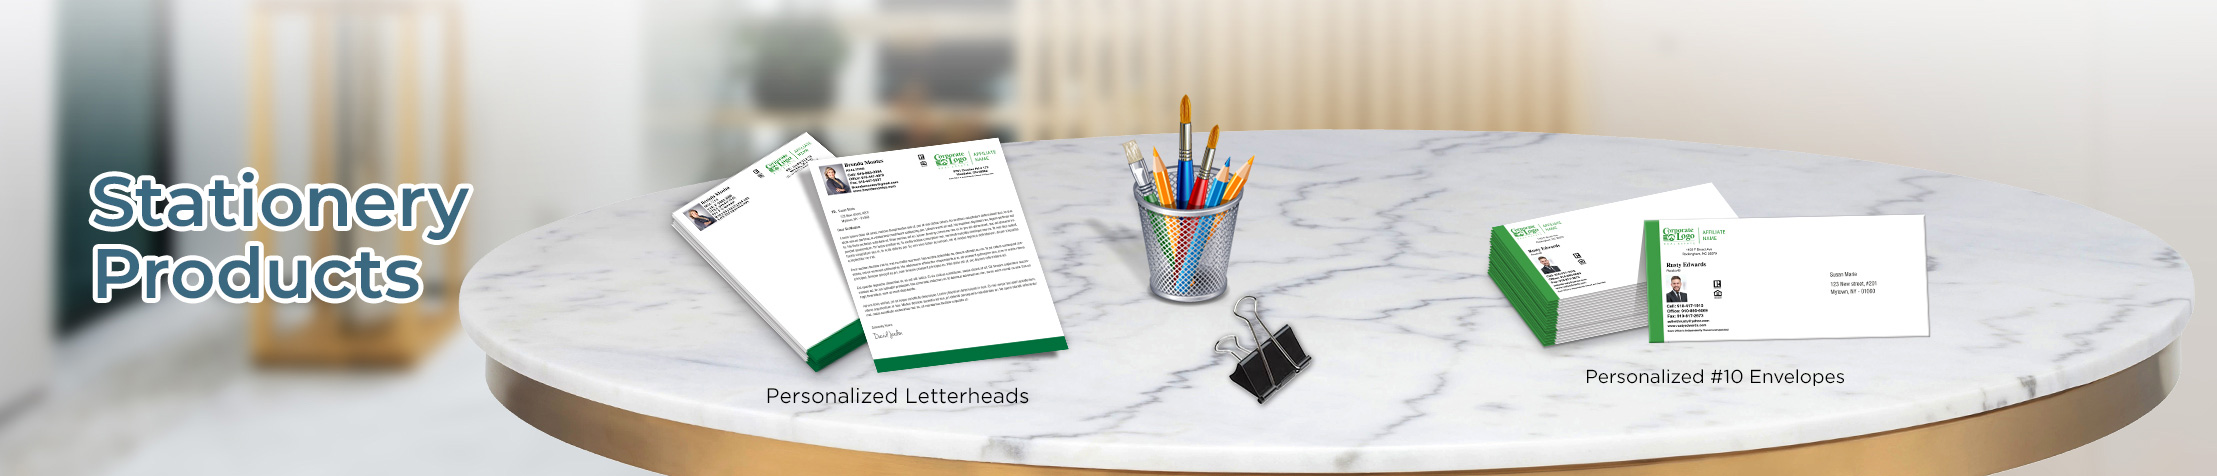 Better Homes and Gardens Real Estate Stationery Products - Custom Letterhead & Envelopes Stationery Products for Realtors | BestPrintBuy.com